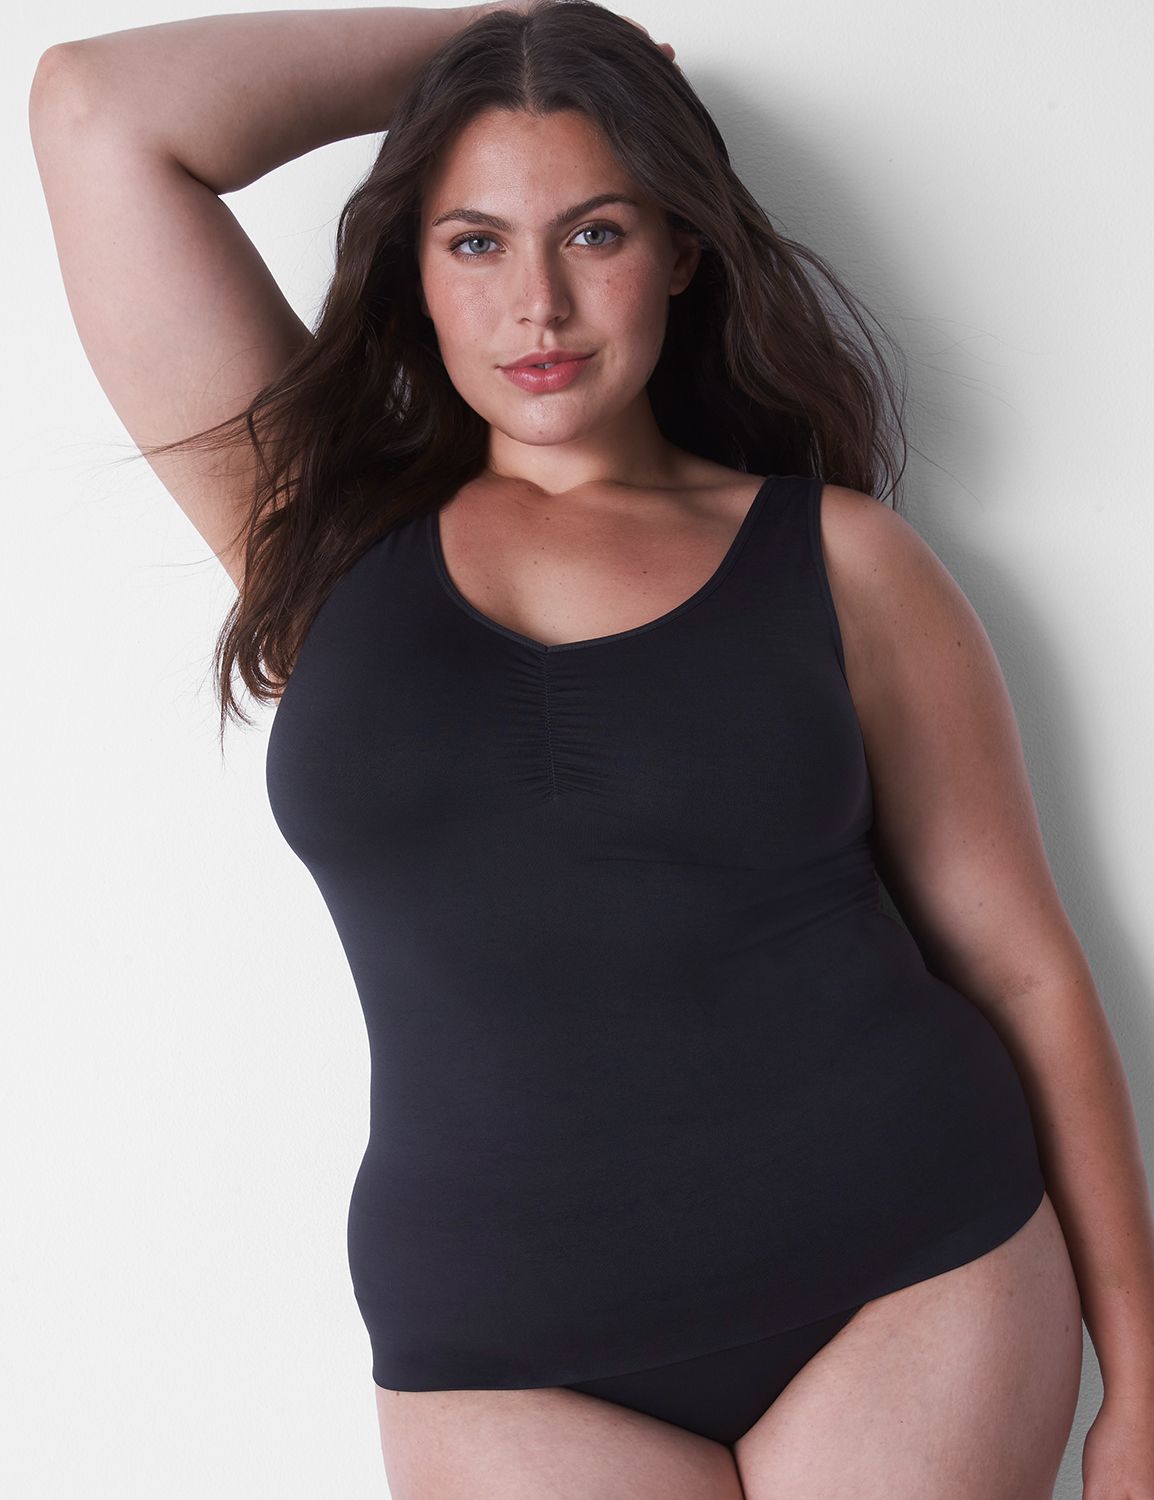 LANE BRYANT CACIQUE Level 3 Contouring High-Waist Thigh Shaper SZ 18/20 in  Cafe $24.95 - PicClick